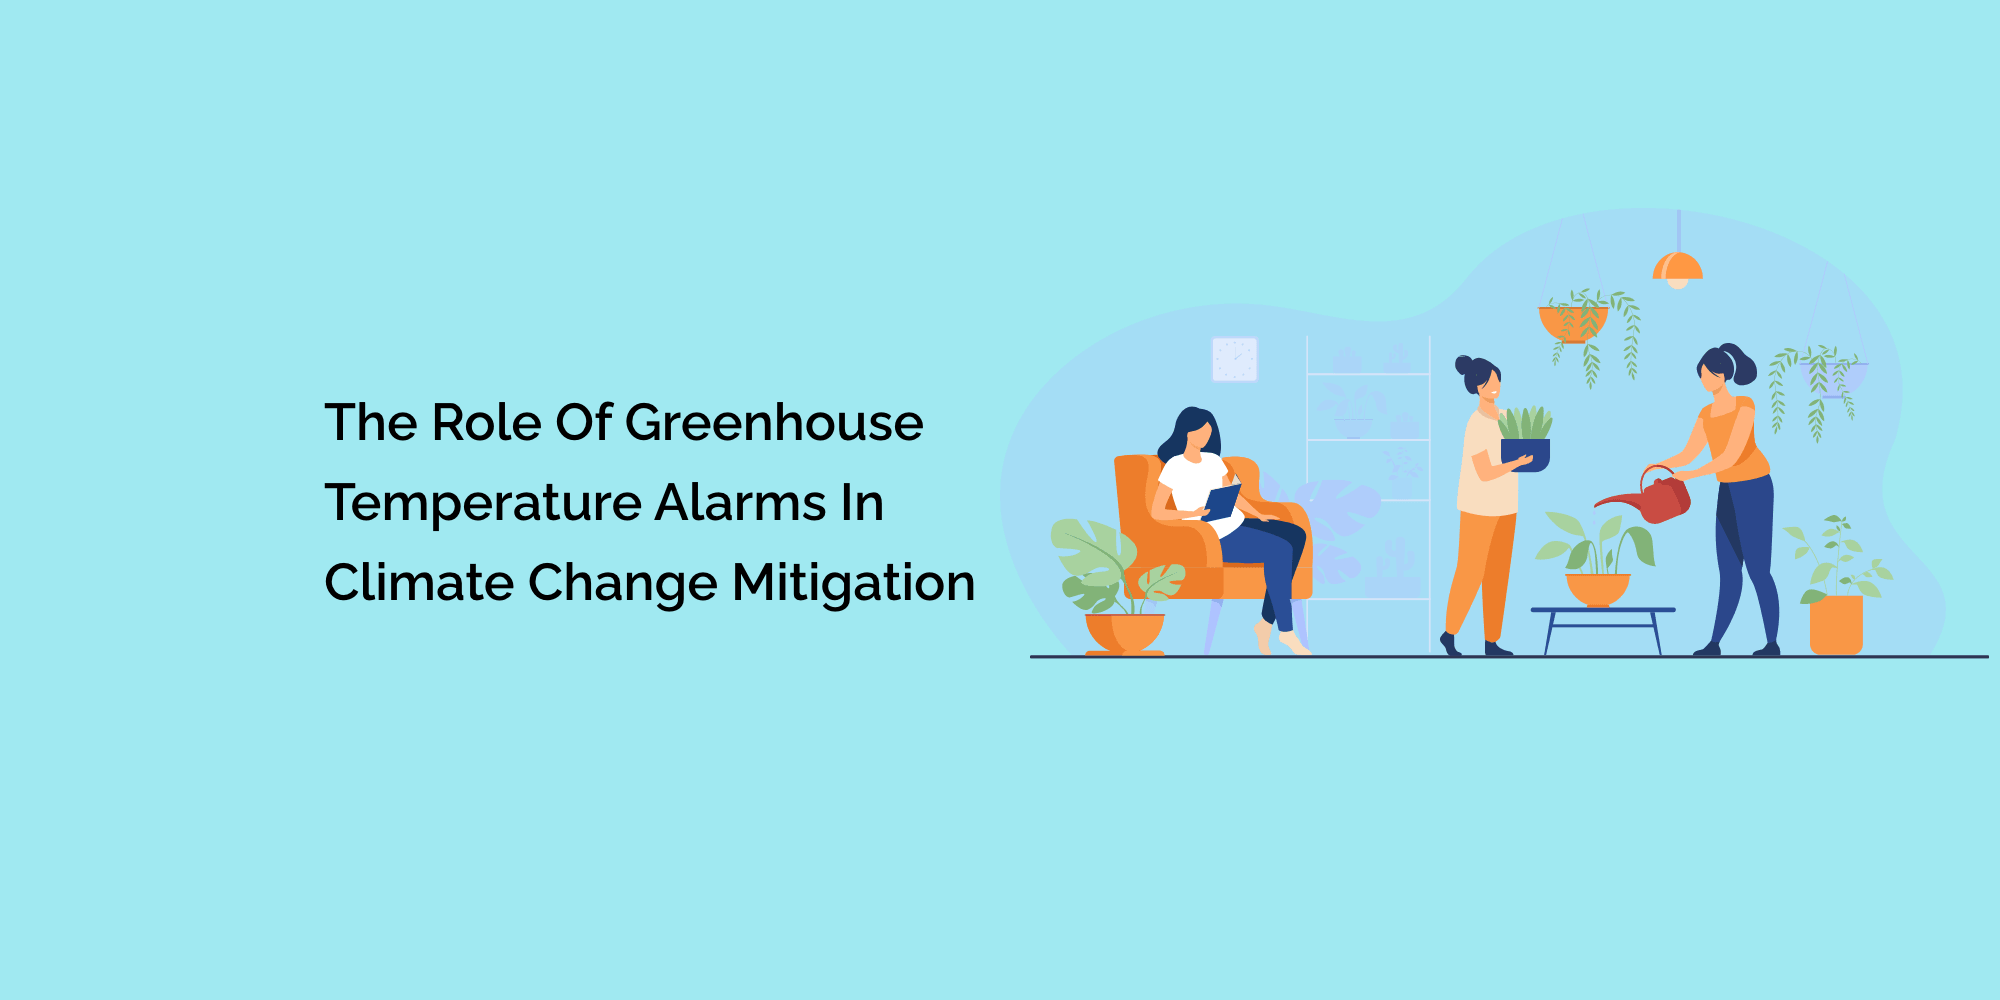 The Role of Greenhouse Temperature Alarms in Climate Change Mitigation